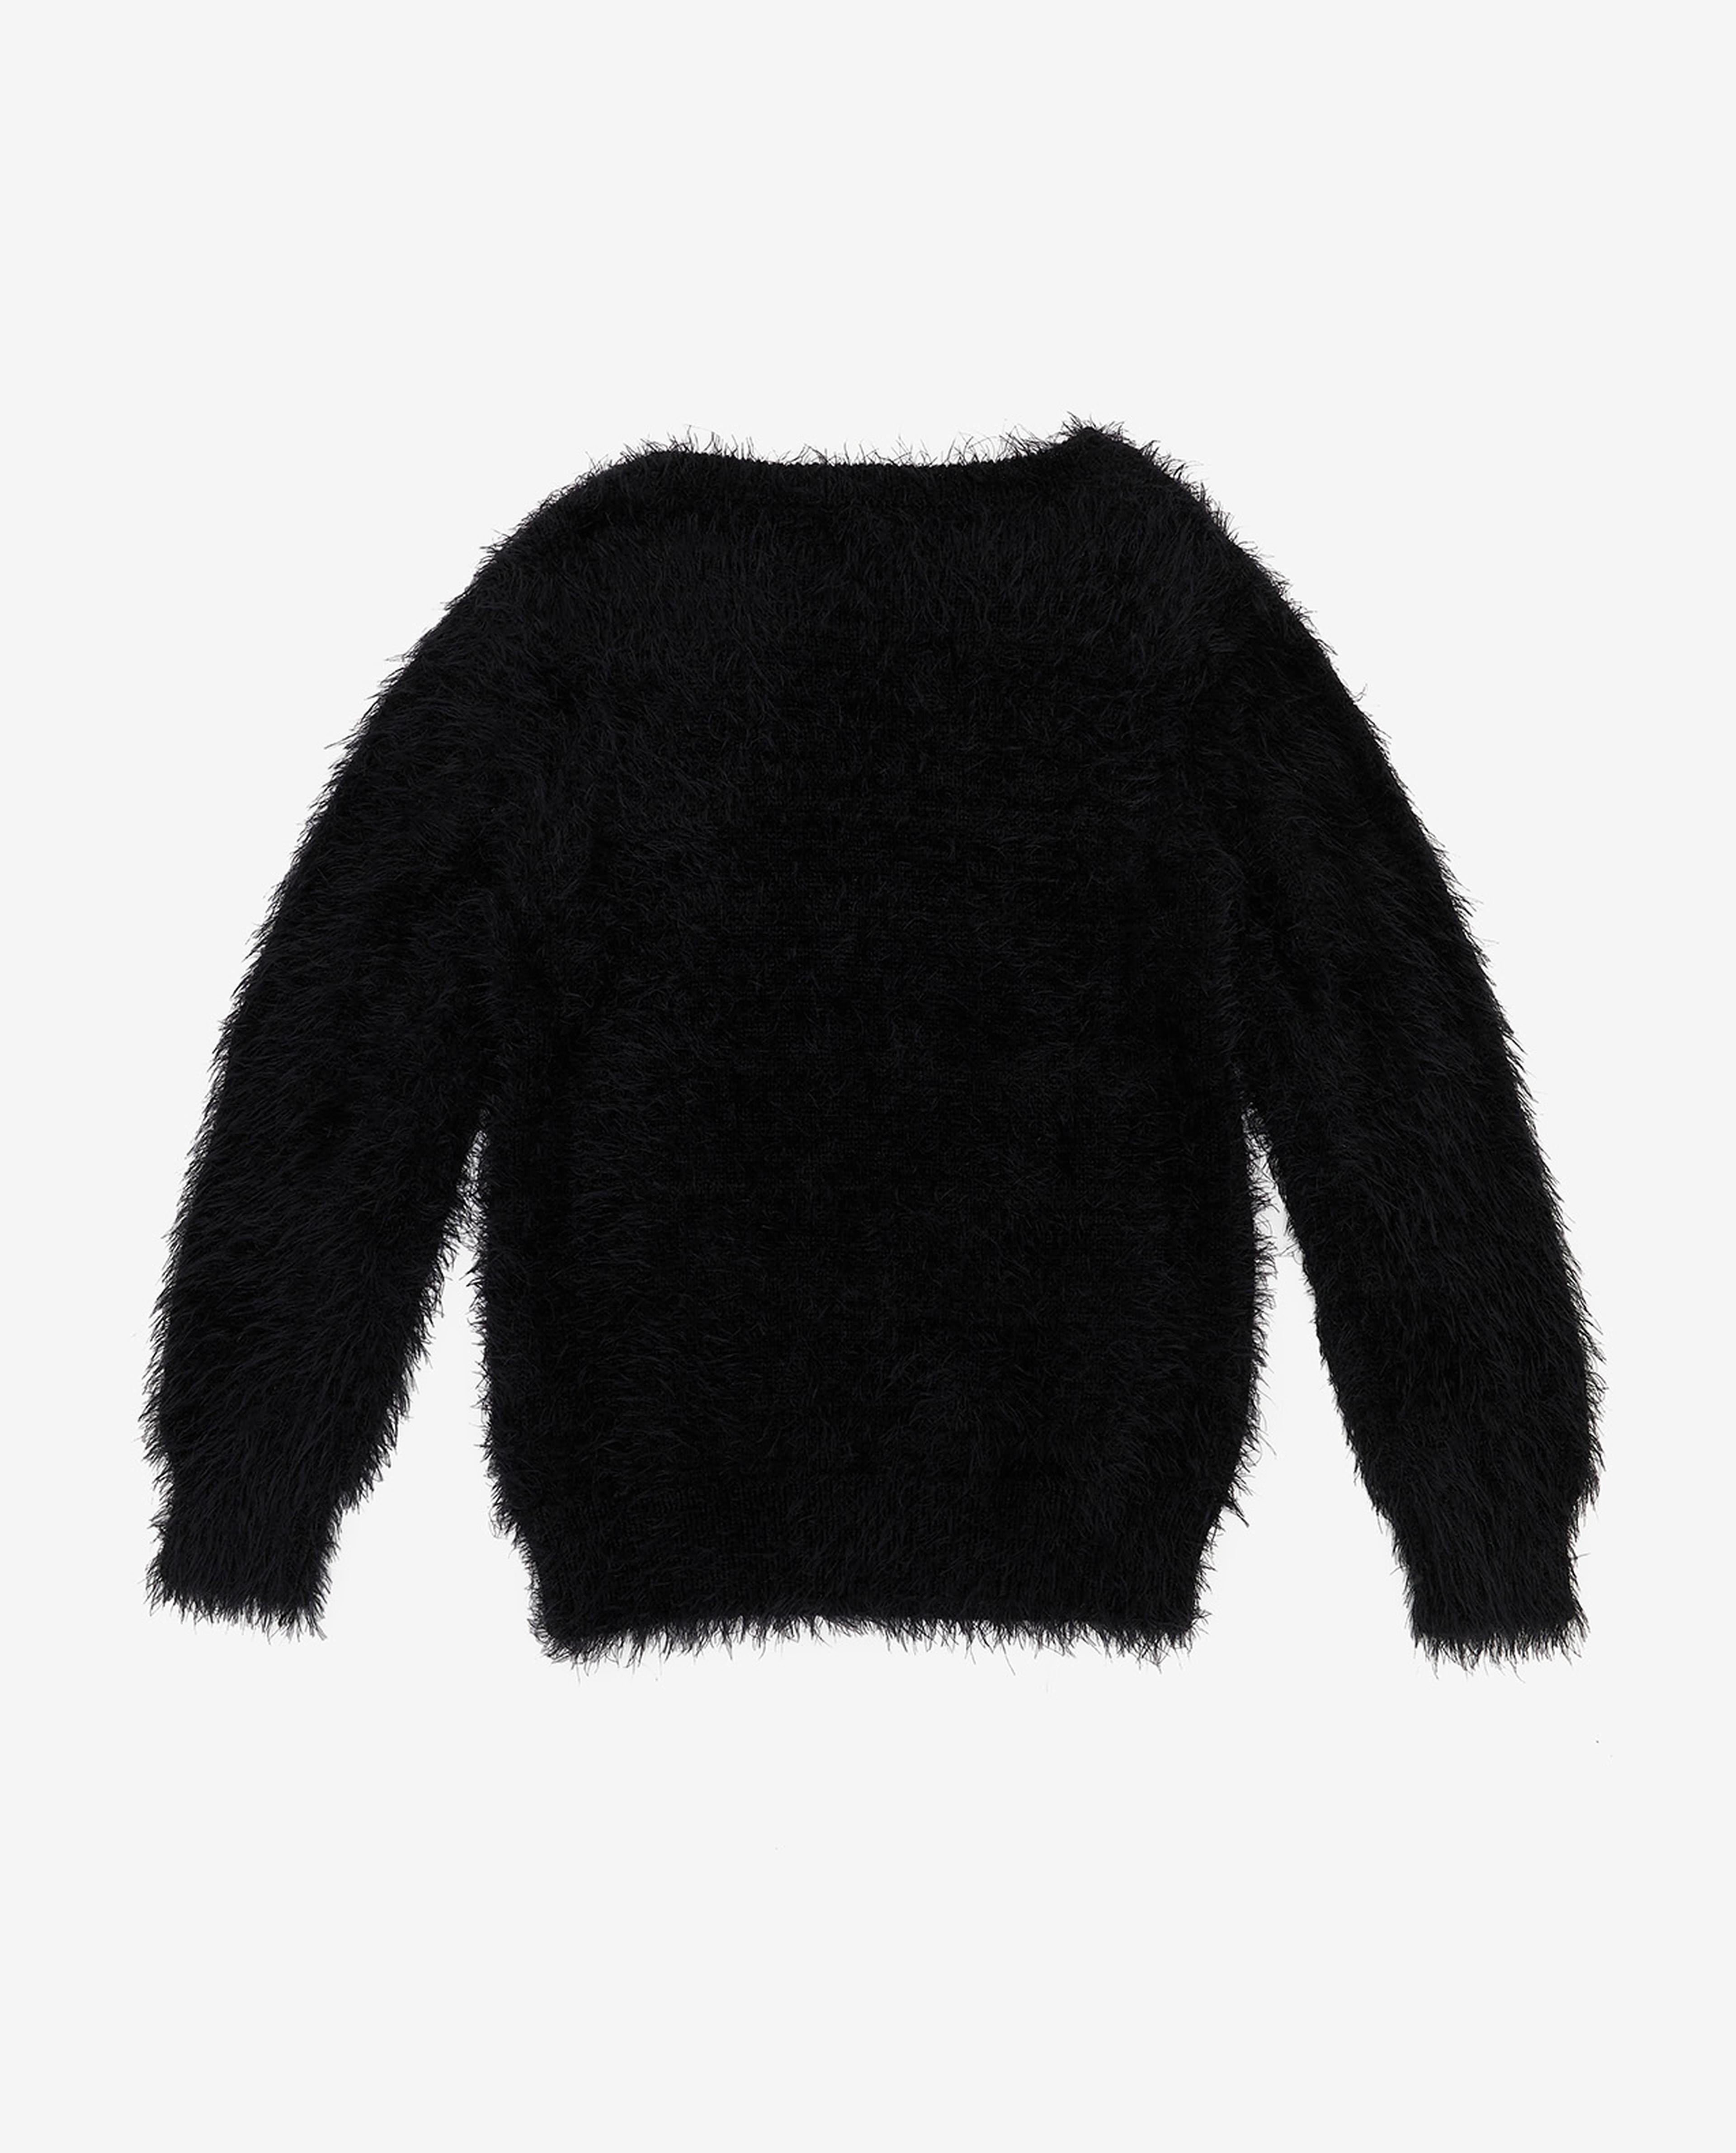 Furry Sweater with Crew Neck and Long Sleeves